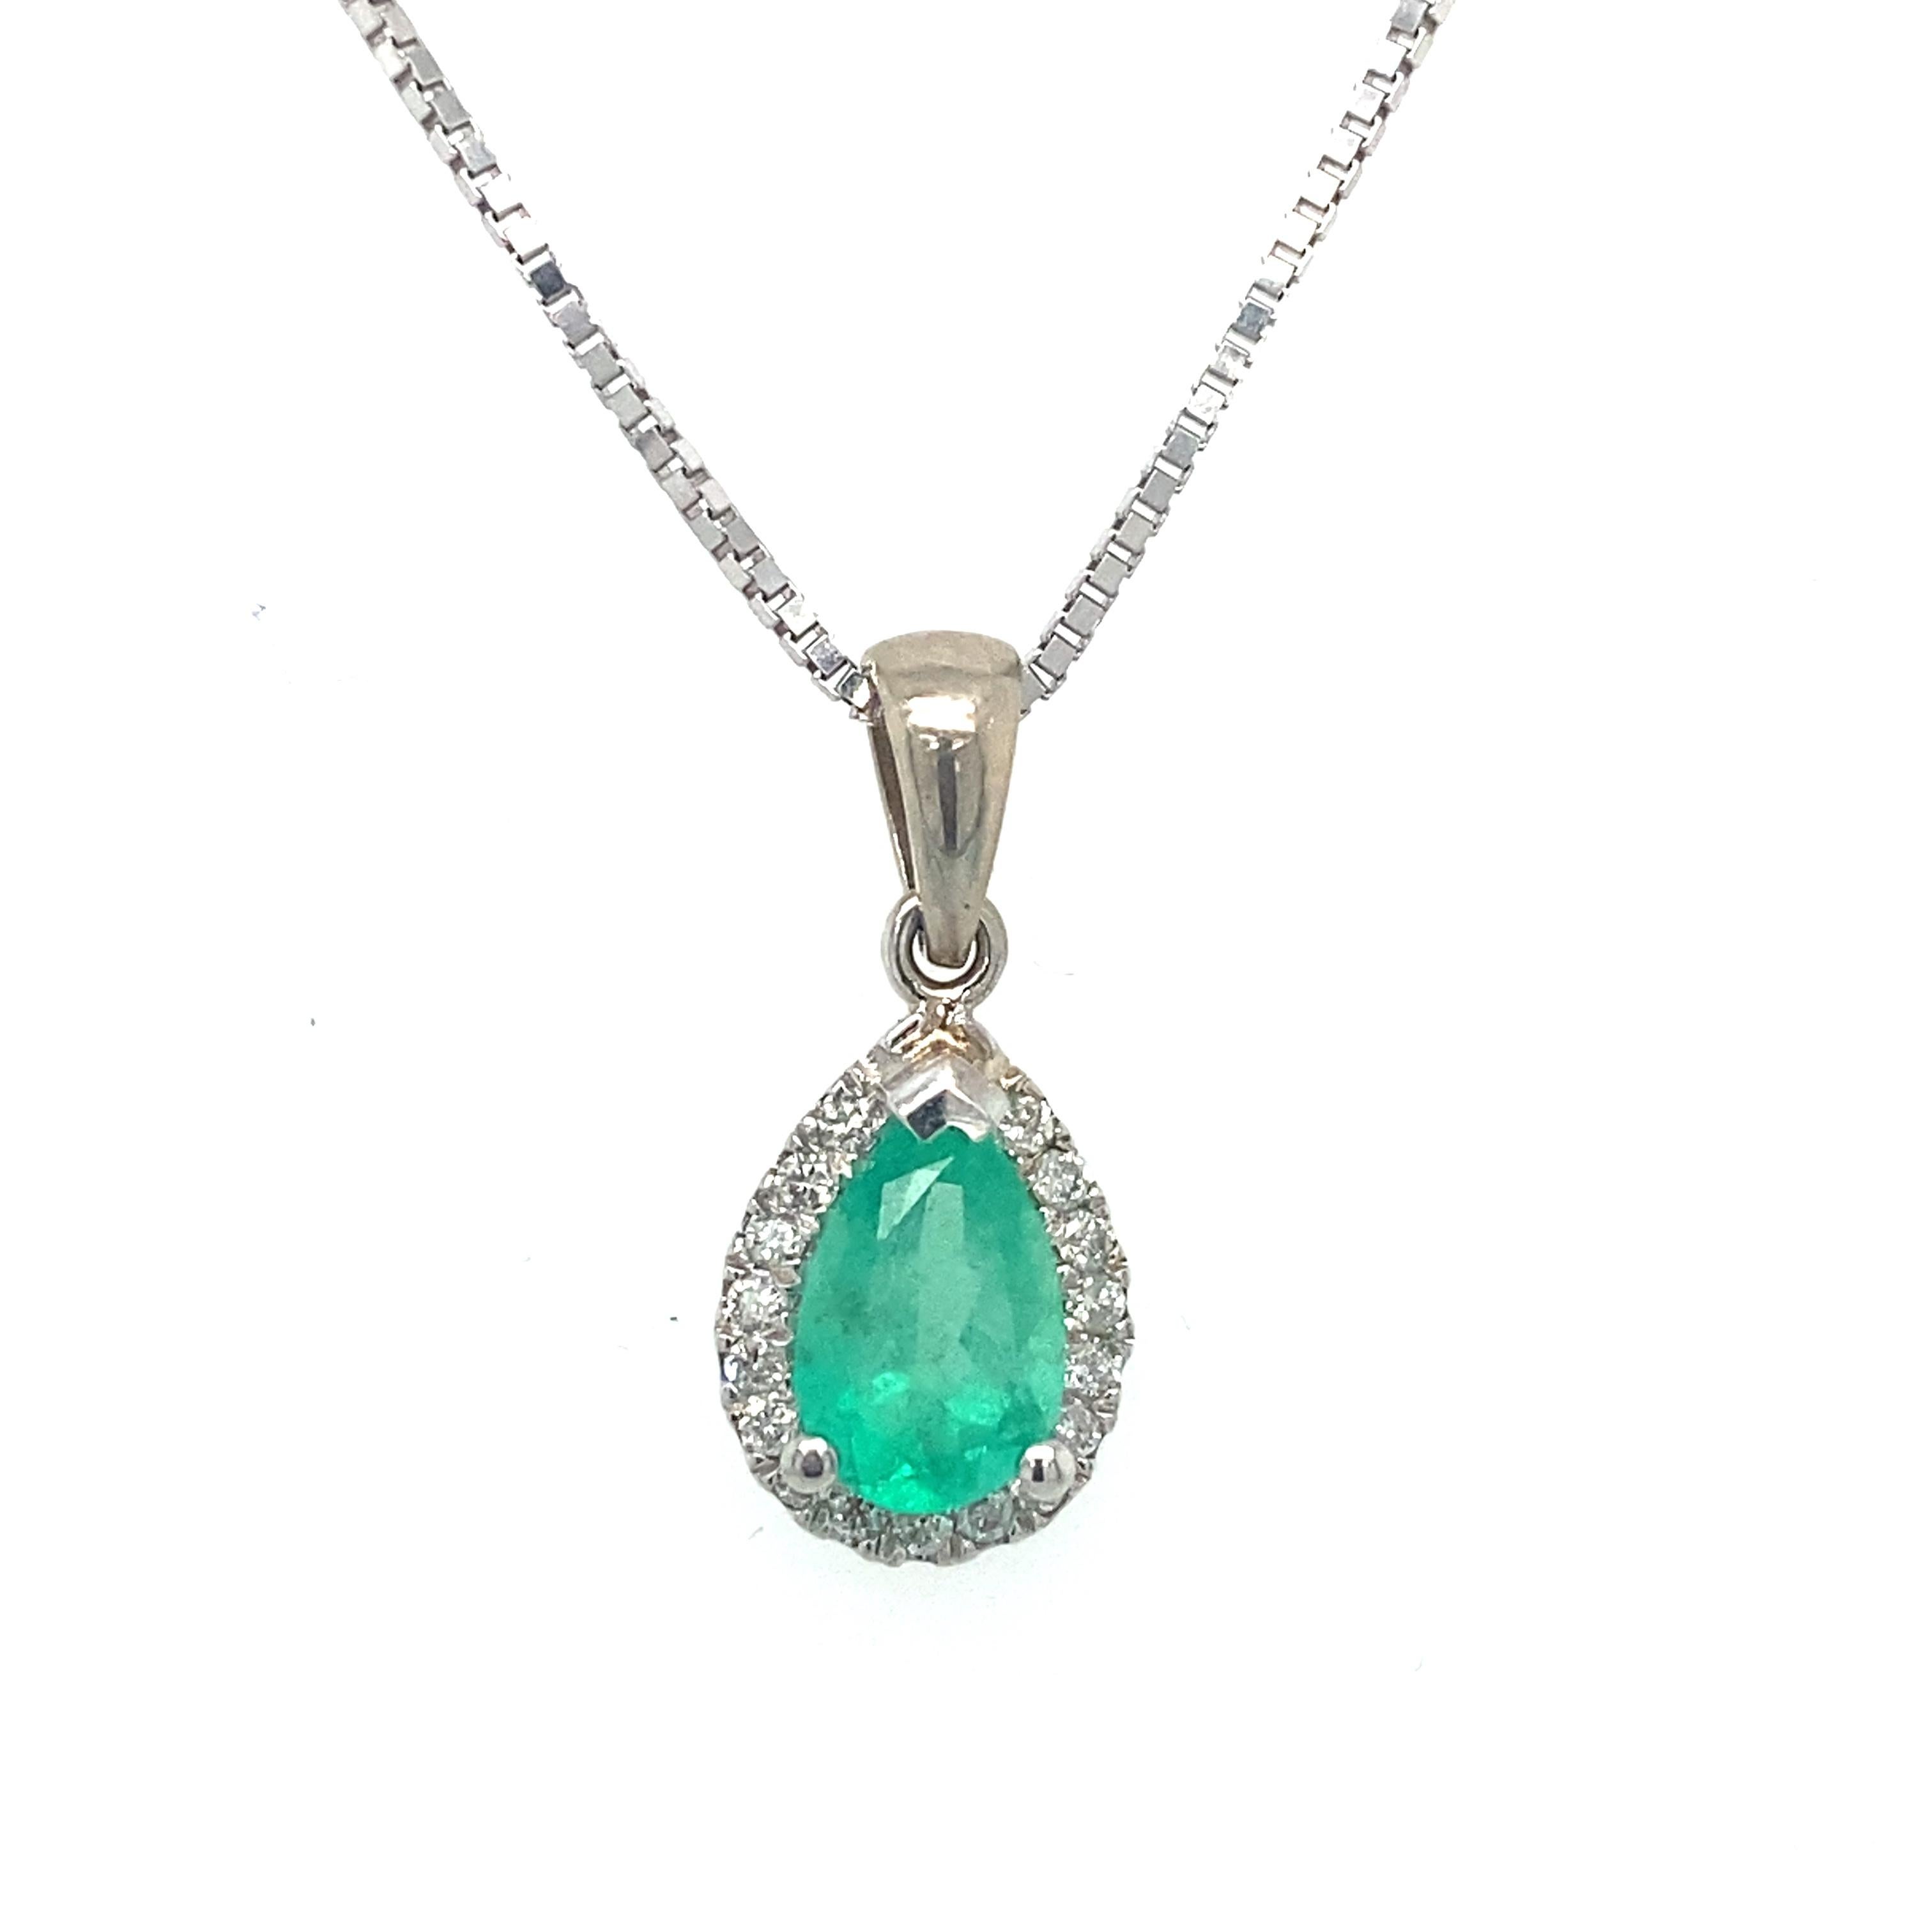 Item Details: This pendant features a center green emerald with a halo of round diamonds.

Circa: 2000s
Metal Type: 14 Karat White Gold
Weight: 3 grams
Size: 16 inch Length necklace

Diamond Details:
Carat: 0.13 carat total weight
Cut: